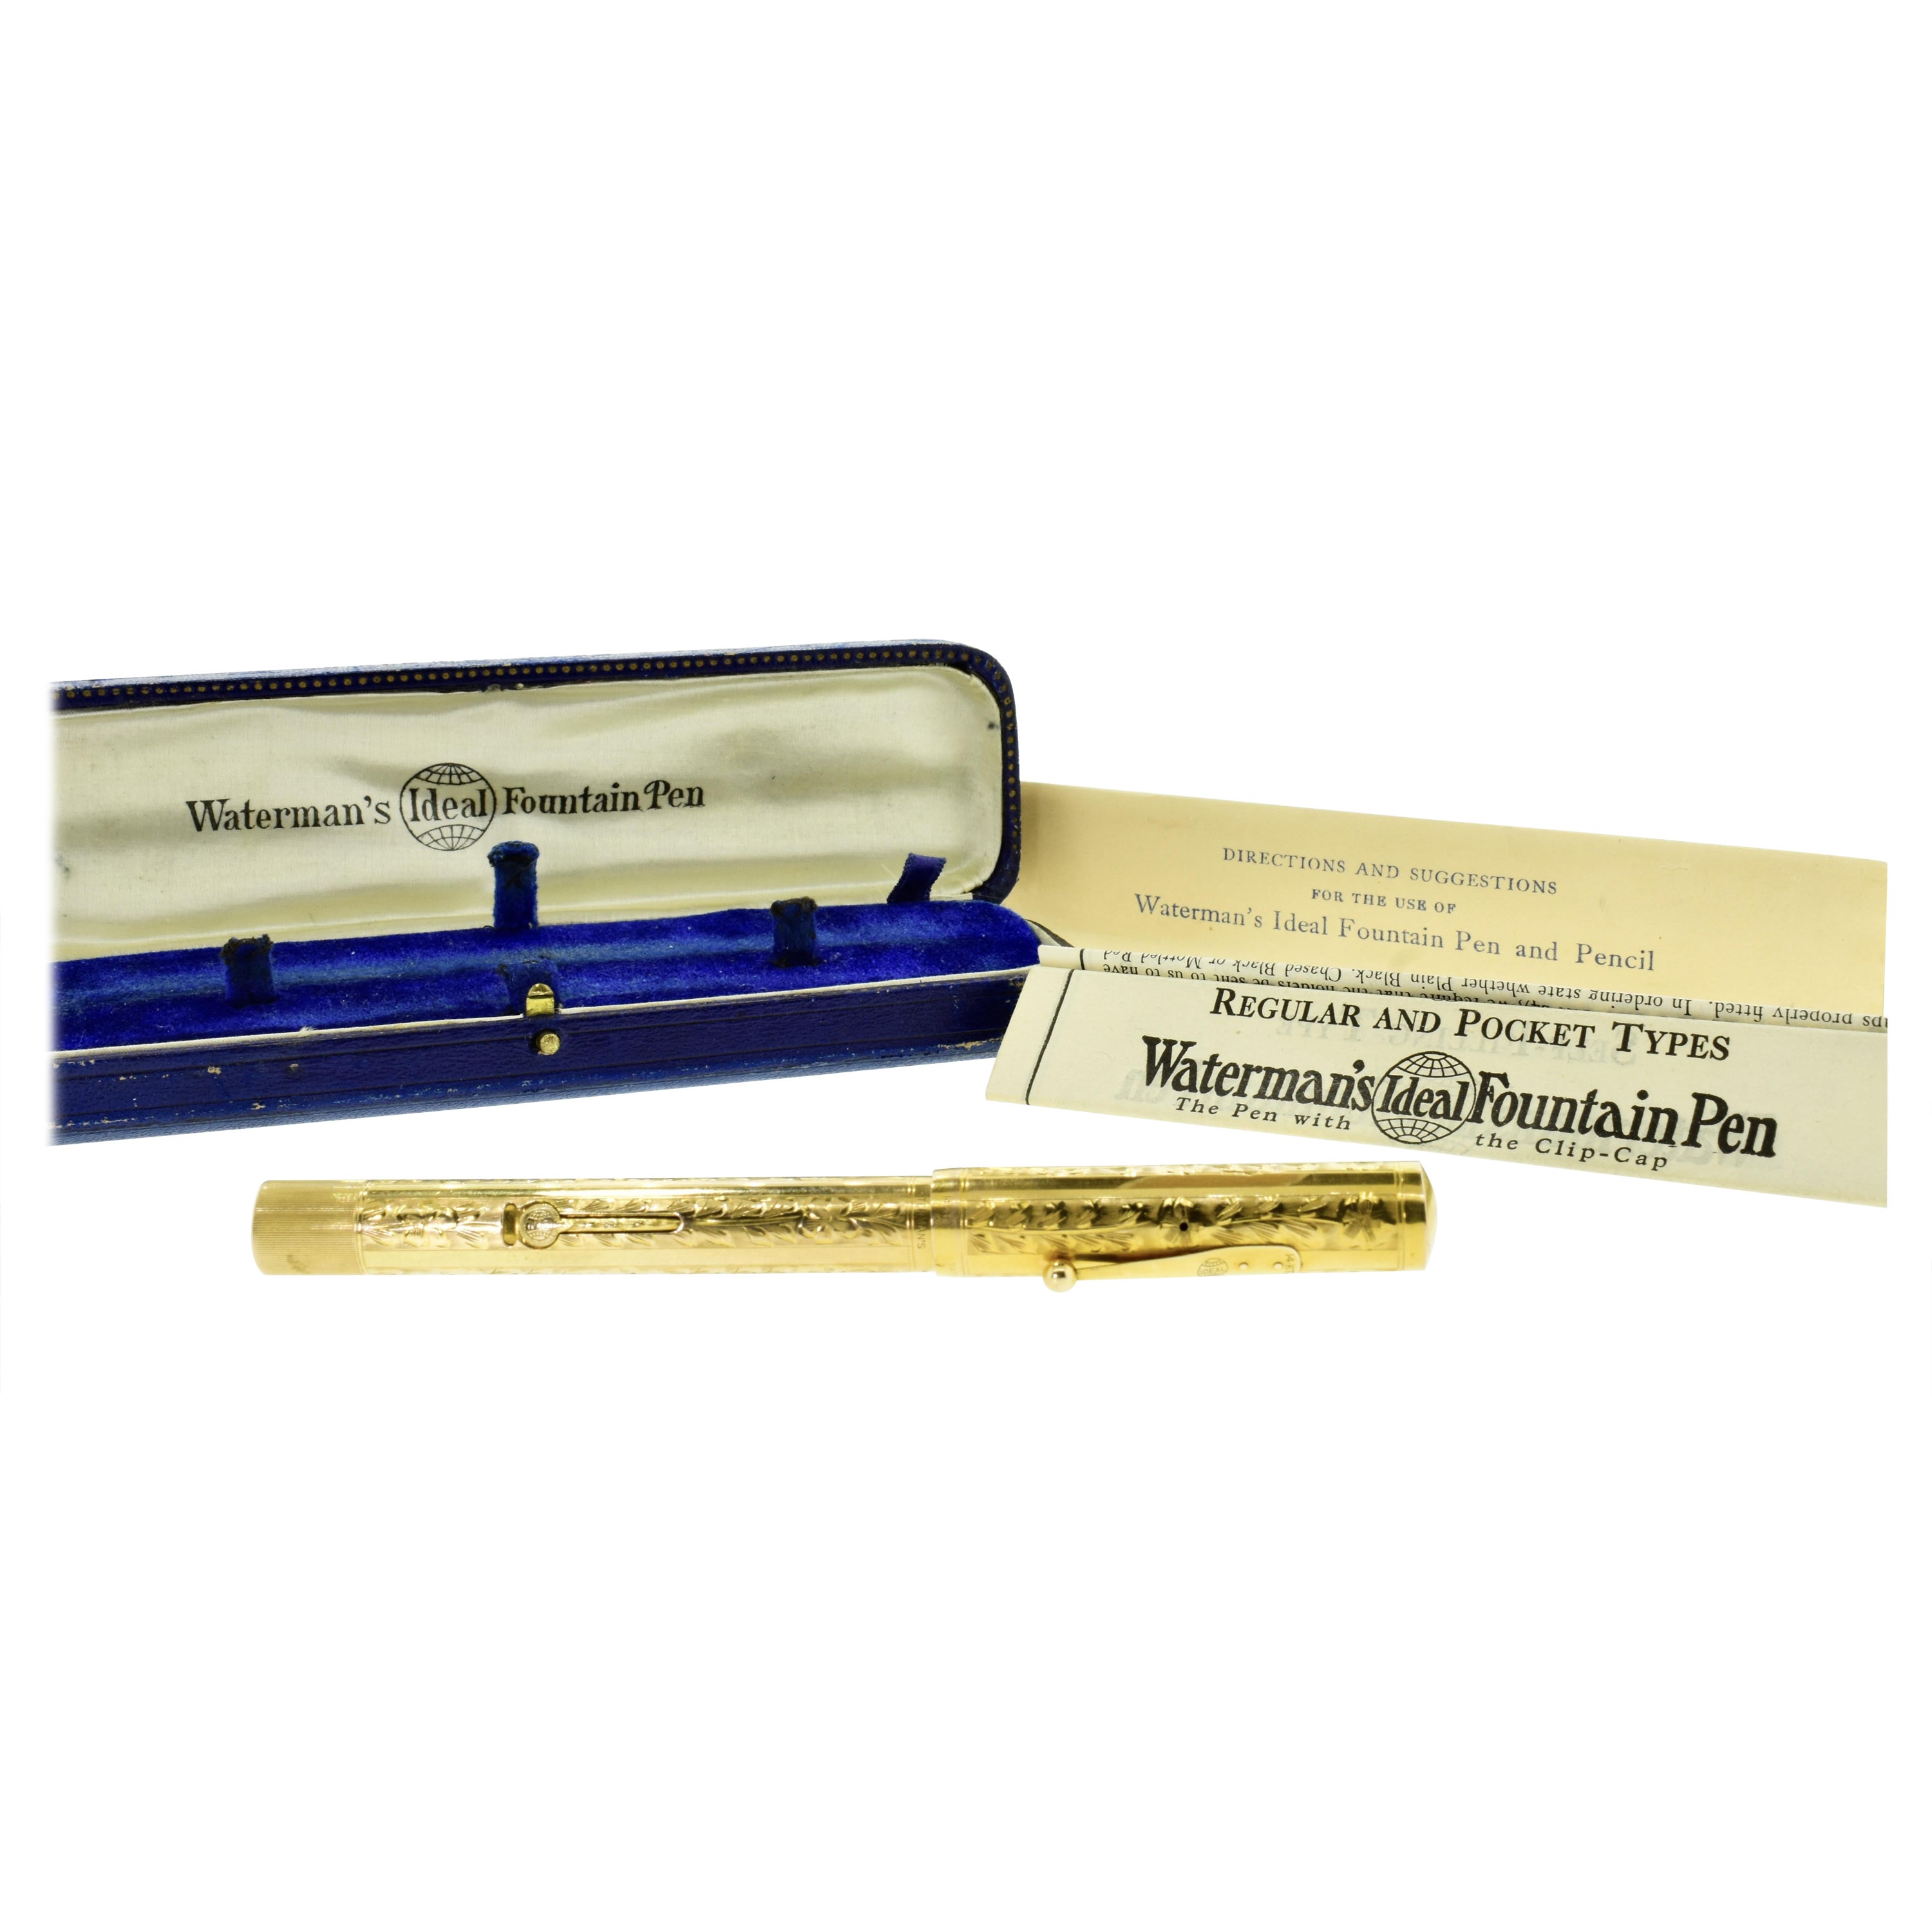 Waterman's 14K Fountain Pen with Original Box and Papers, c. 1915.